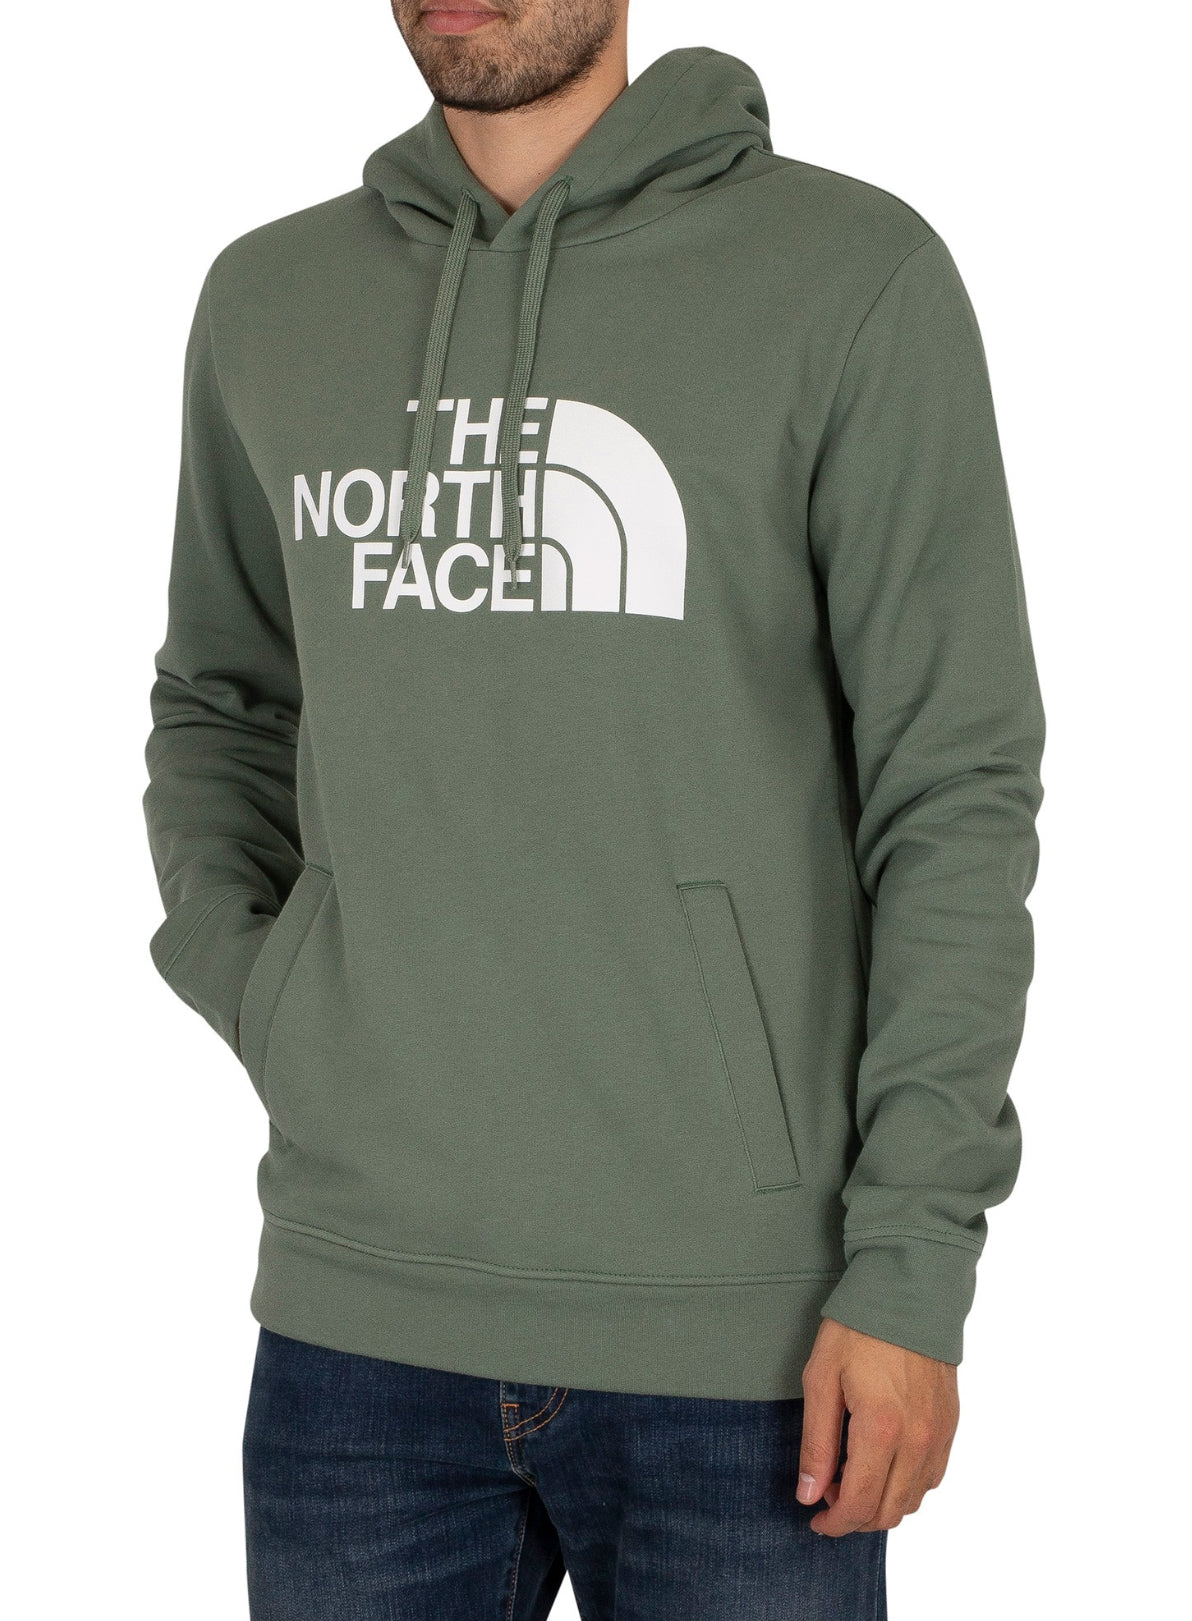 THE NORTH FACE HALF DOME PULLOVER HOODIE LAUREL WREATH GREEN